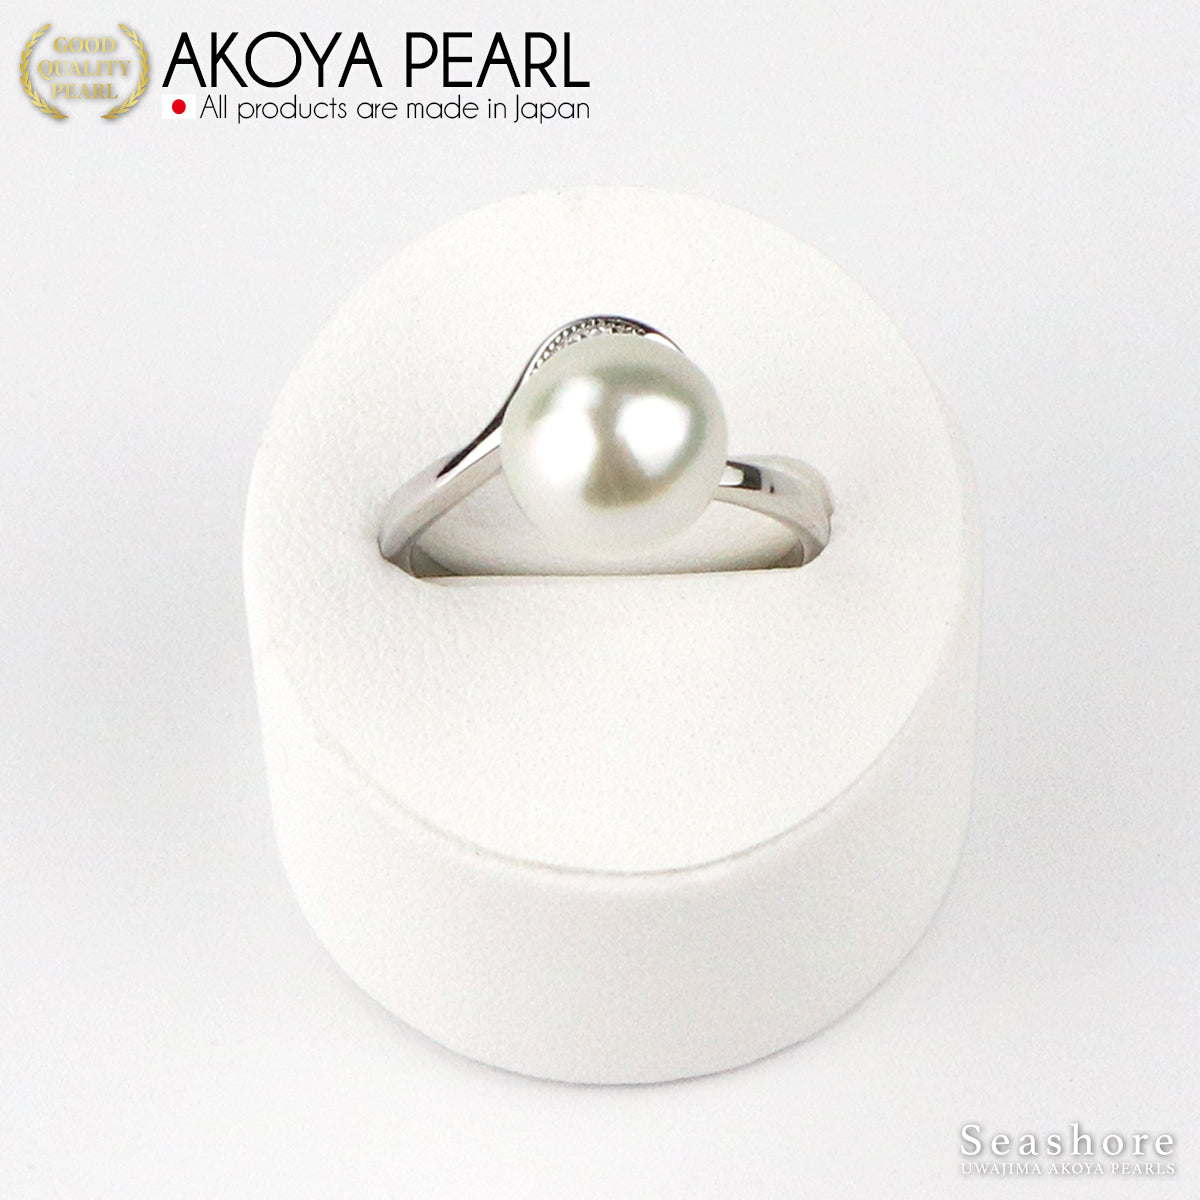 Uncolored Natural White Free Size Ring Akoya Pearl Semi-Baroque [8.0mmUP] SV925 Folk Ring Country of Origin Certificate Card Ring Case Included (4043)